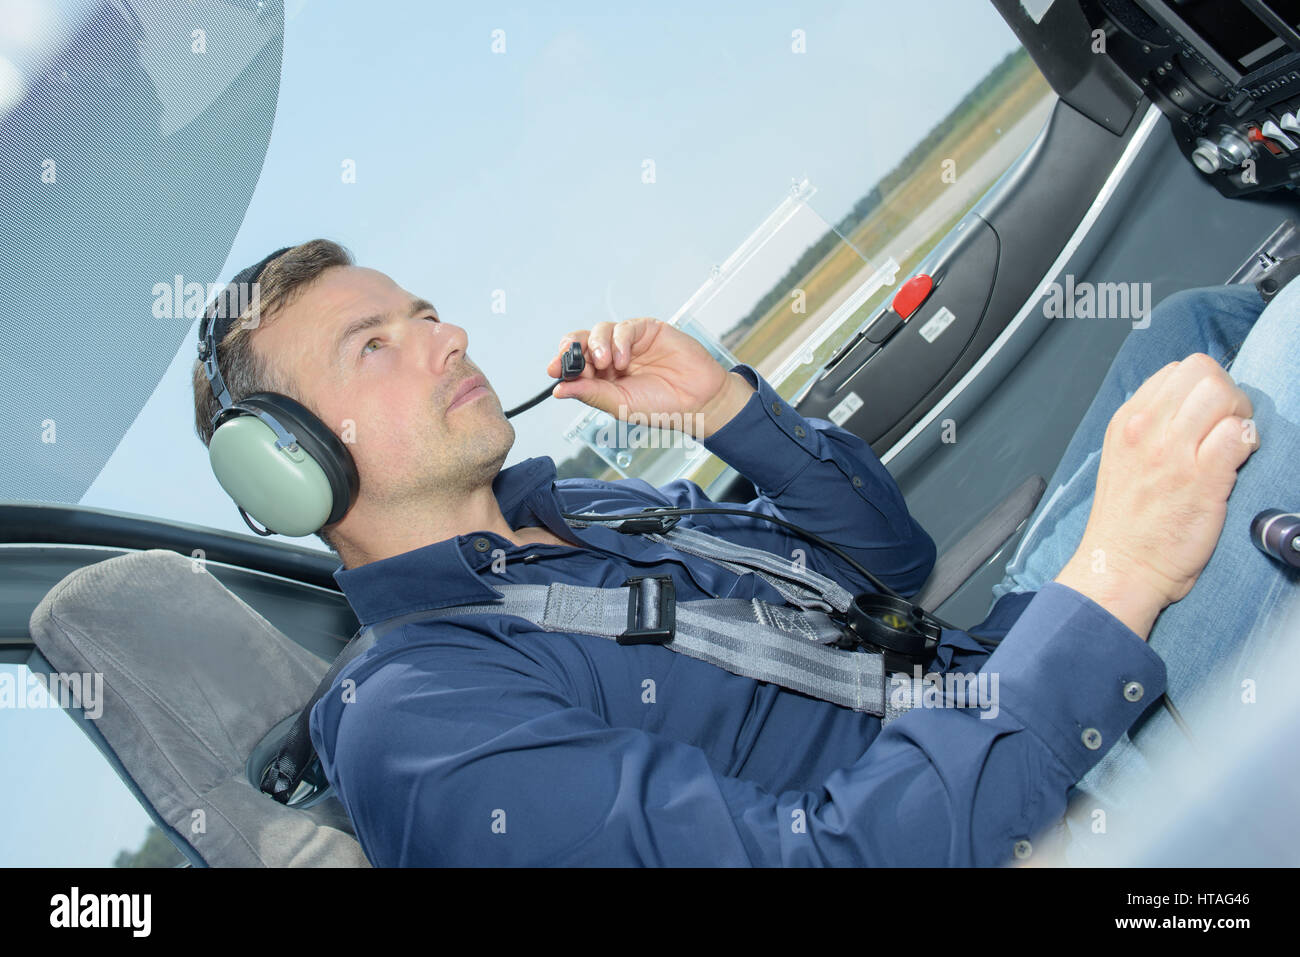 Pilot wearing headset with microphone Stock Photo